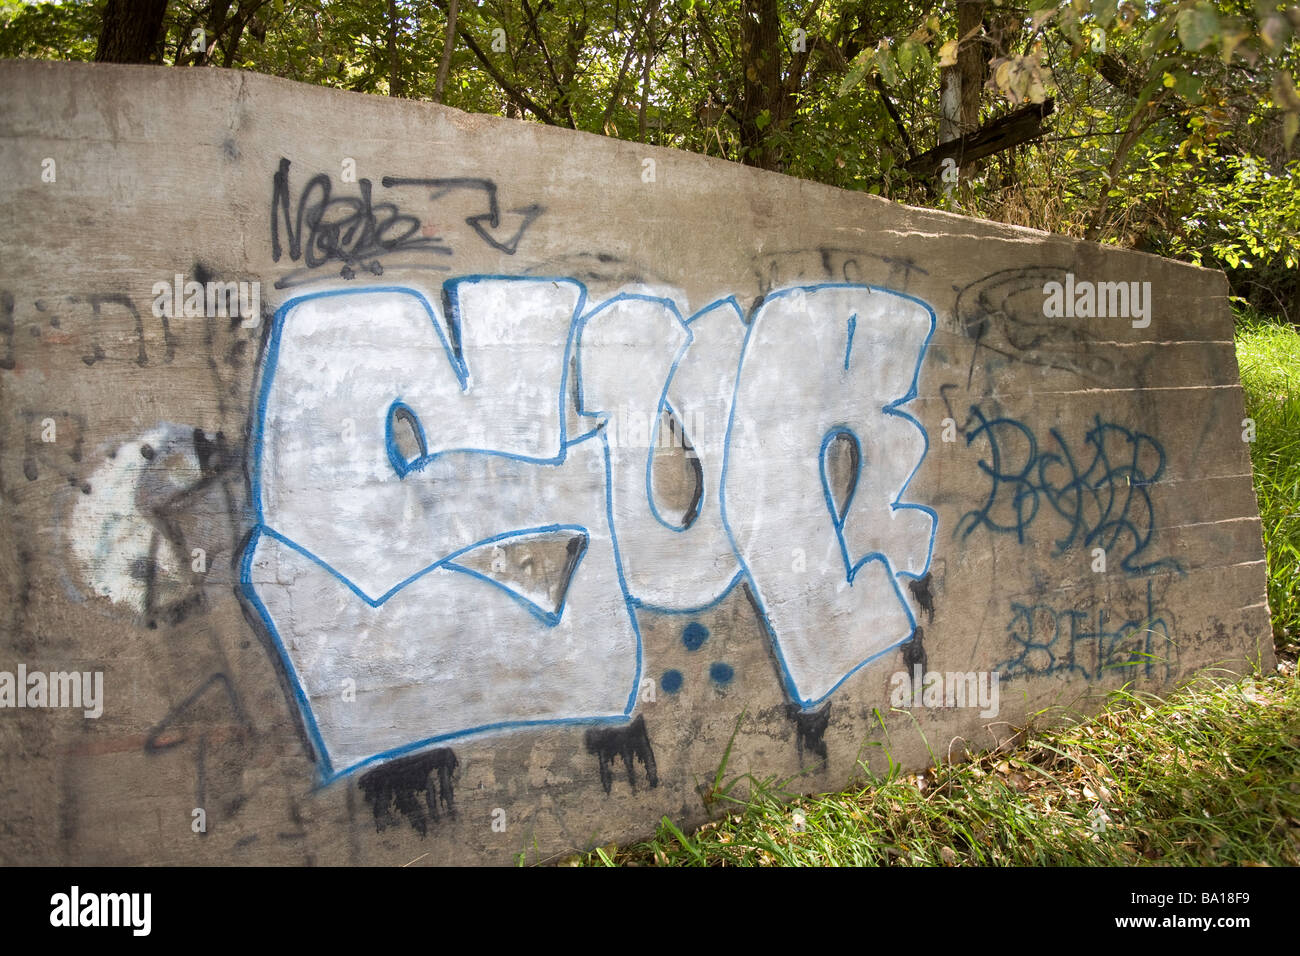 Gang grafitti in rural USA. Gangs are migrating from inner cities to rural communities. Stock Photo